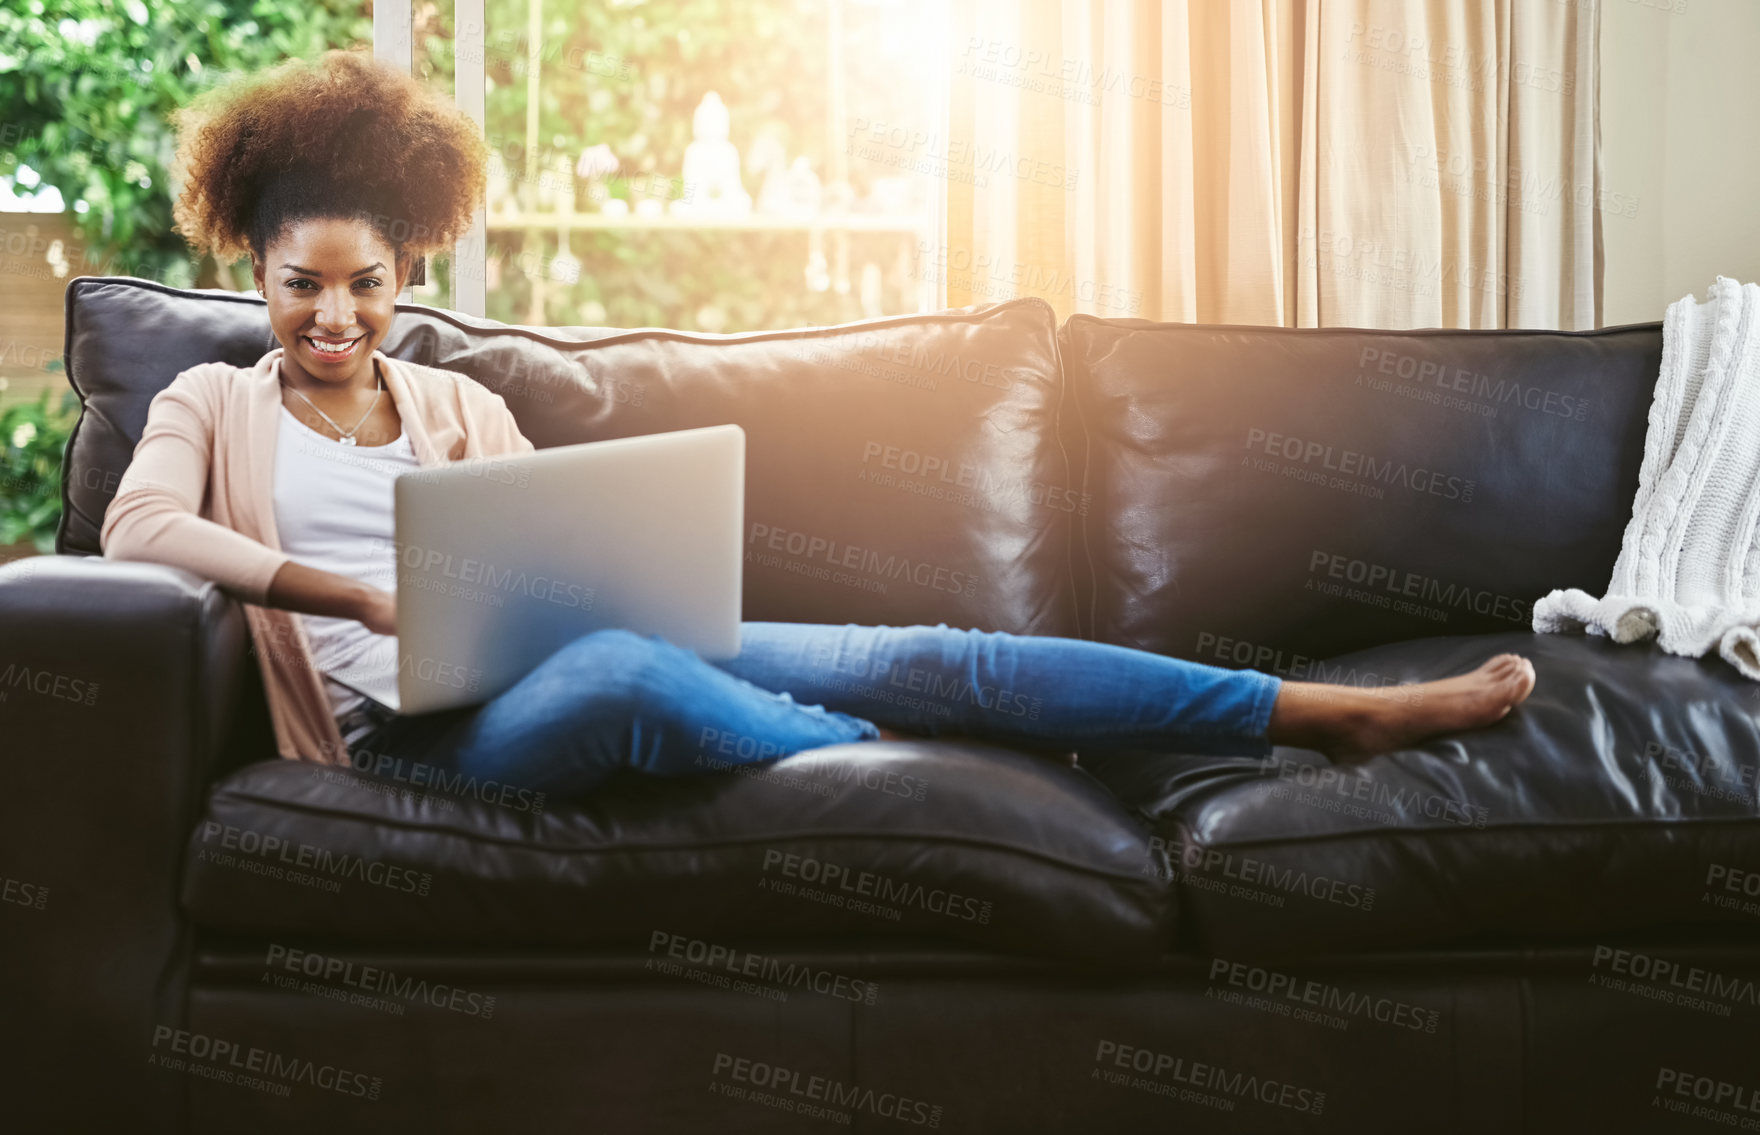 Buy stock photo Portrait of an attractive young woman using laptop while chilling at home on the sofa